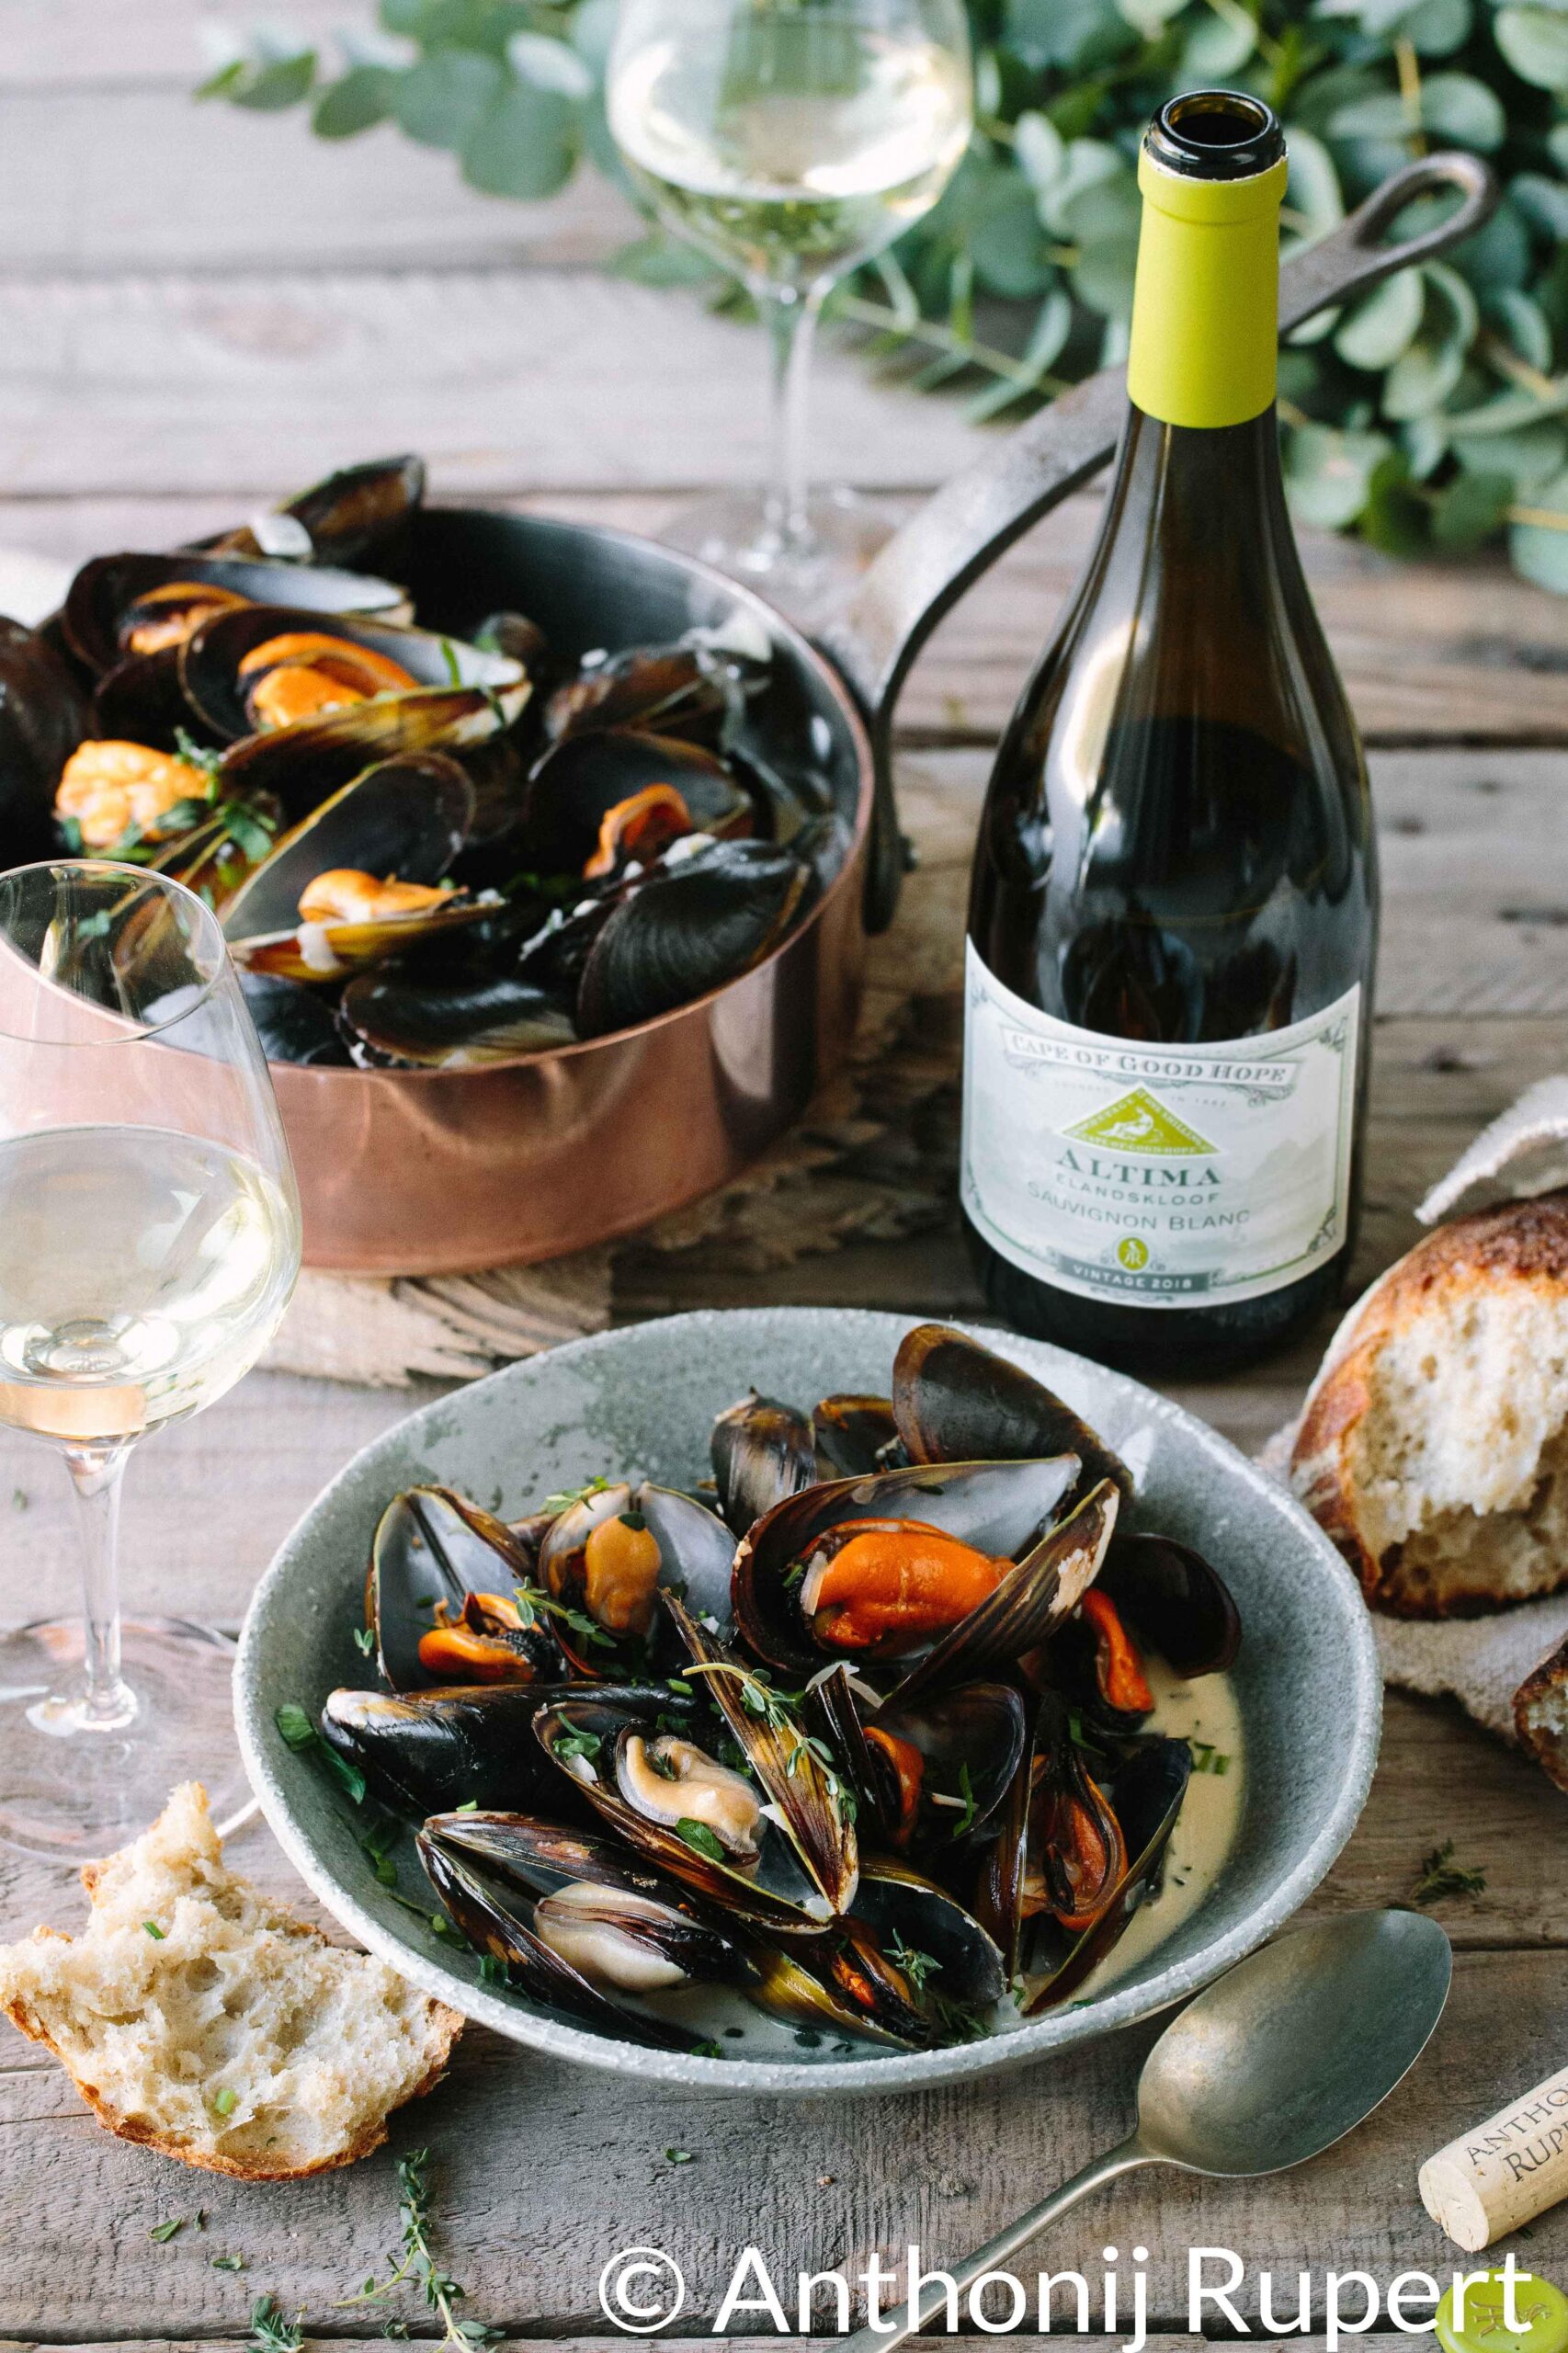  Impress your guests with these Bay Mussels in White Wine that are super easy to make but look and taste restaurant-worthy.